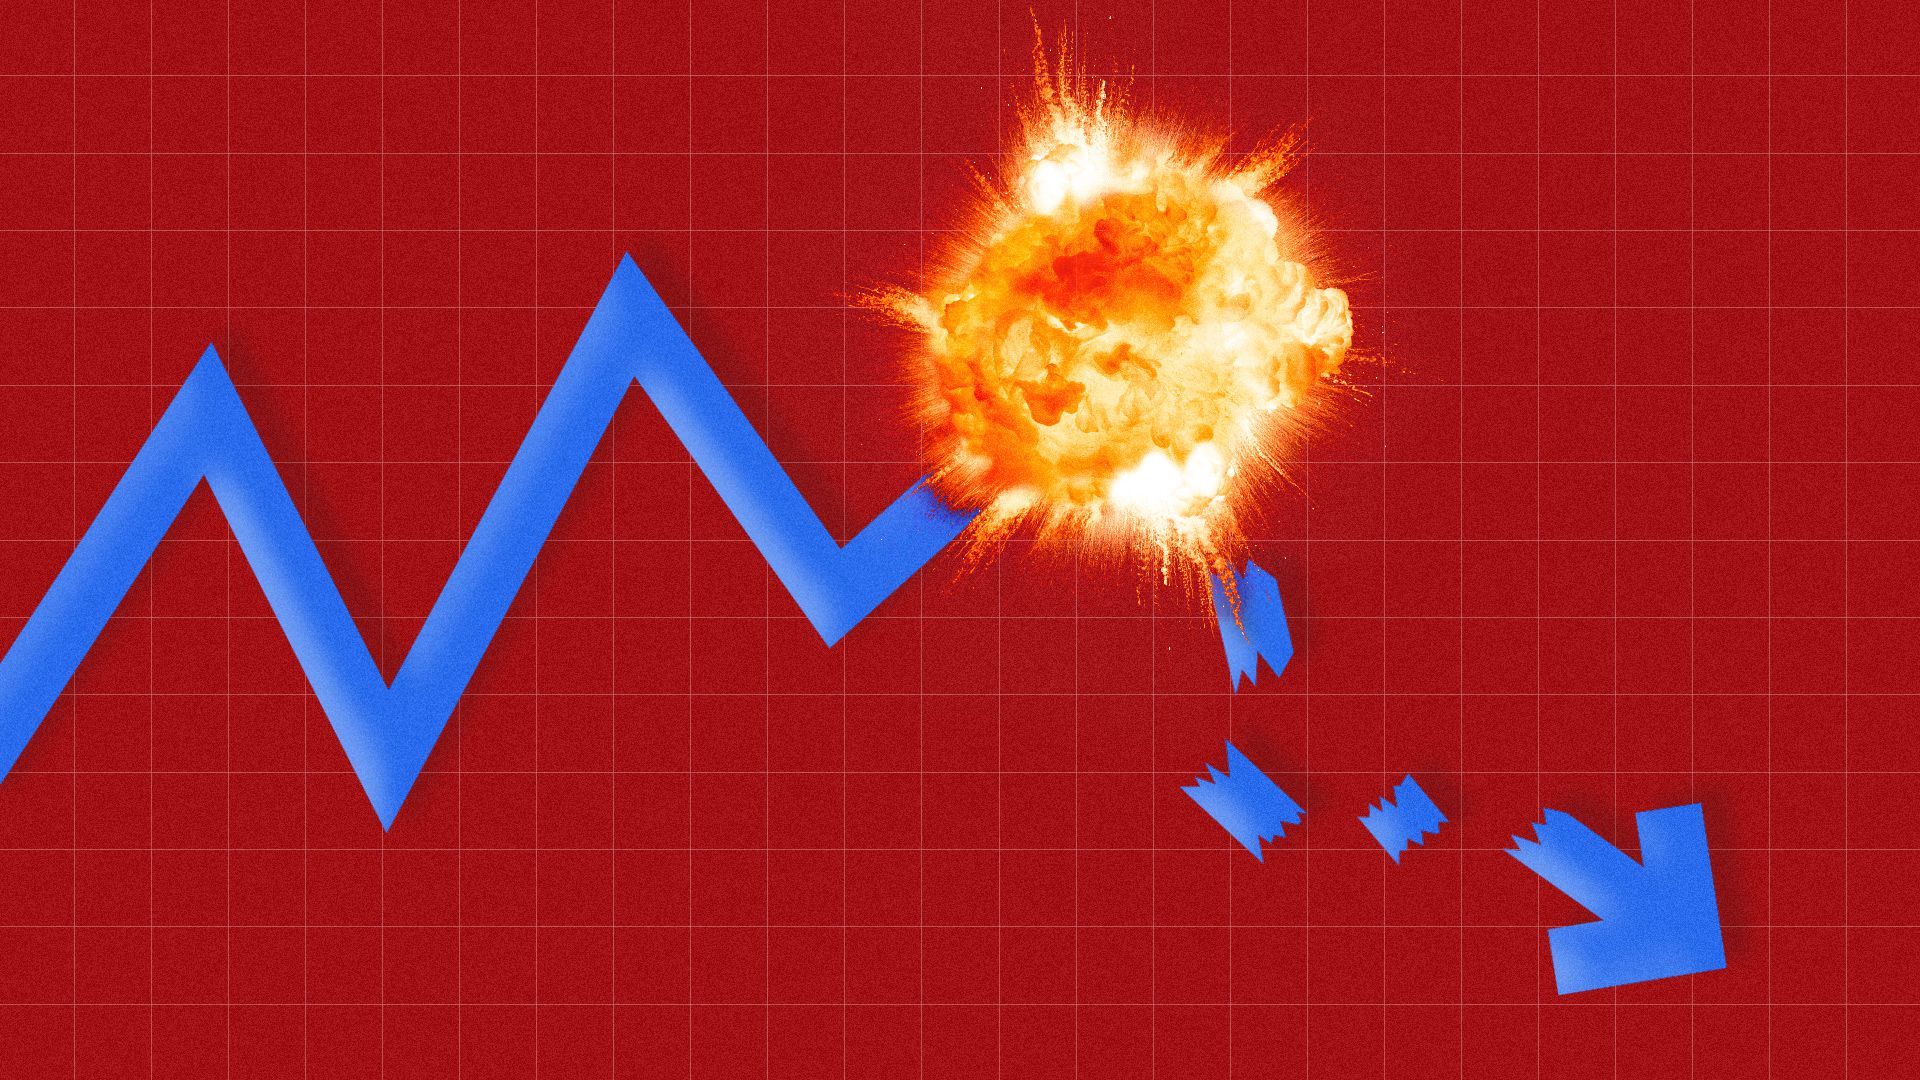 Illustration of an explosion on on a trend line, sending pieces falling.